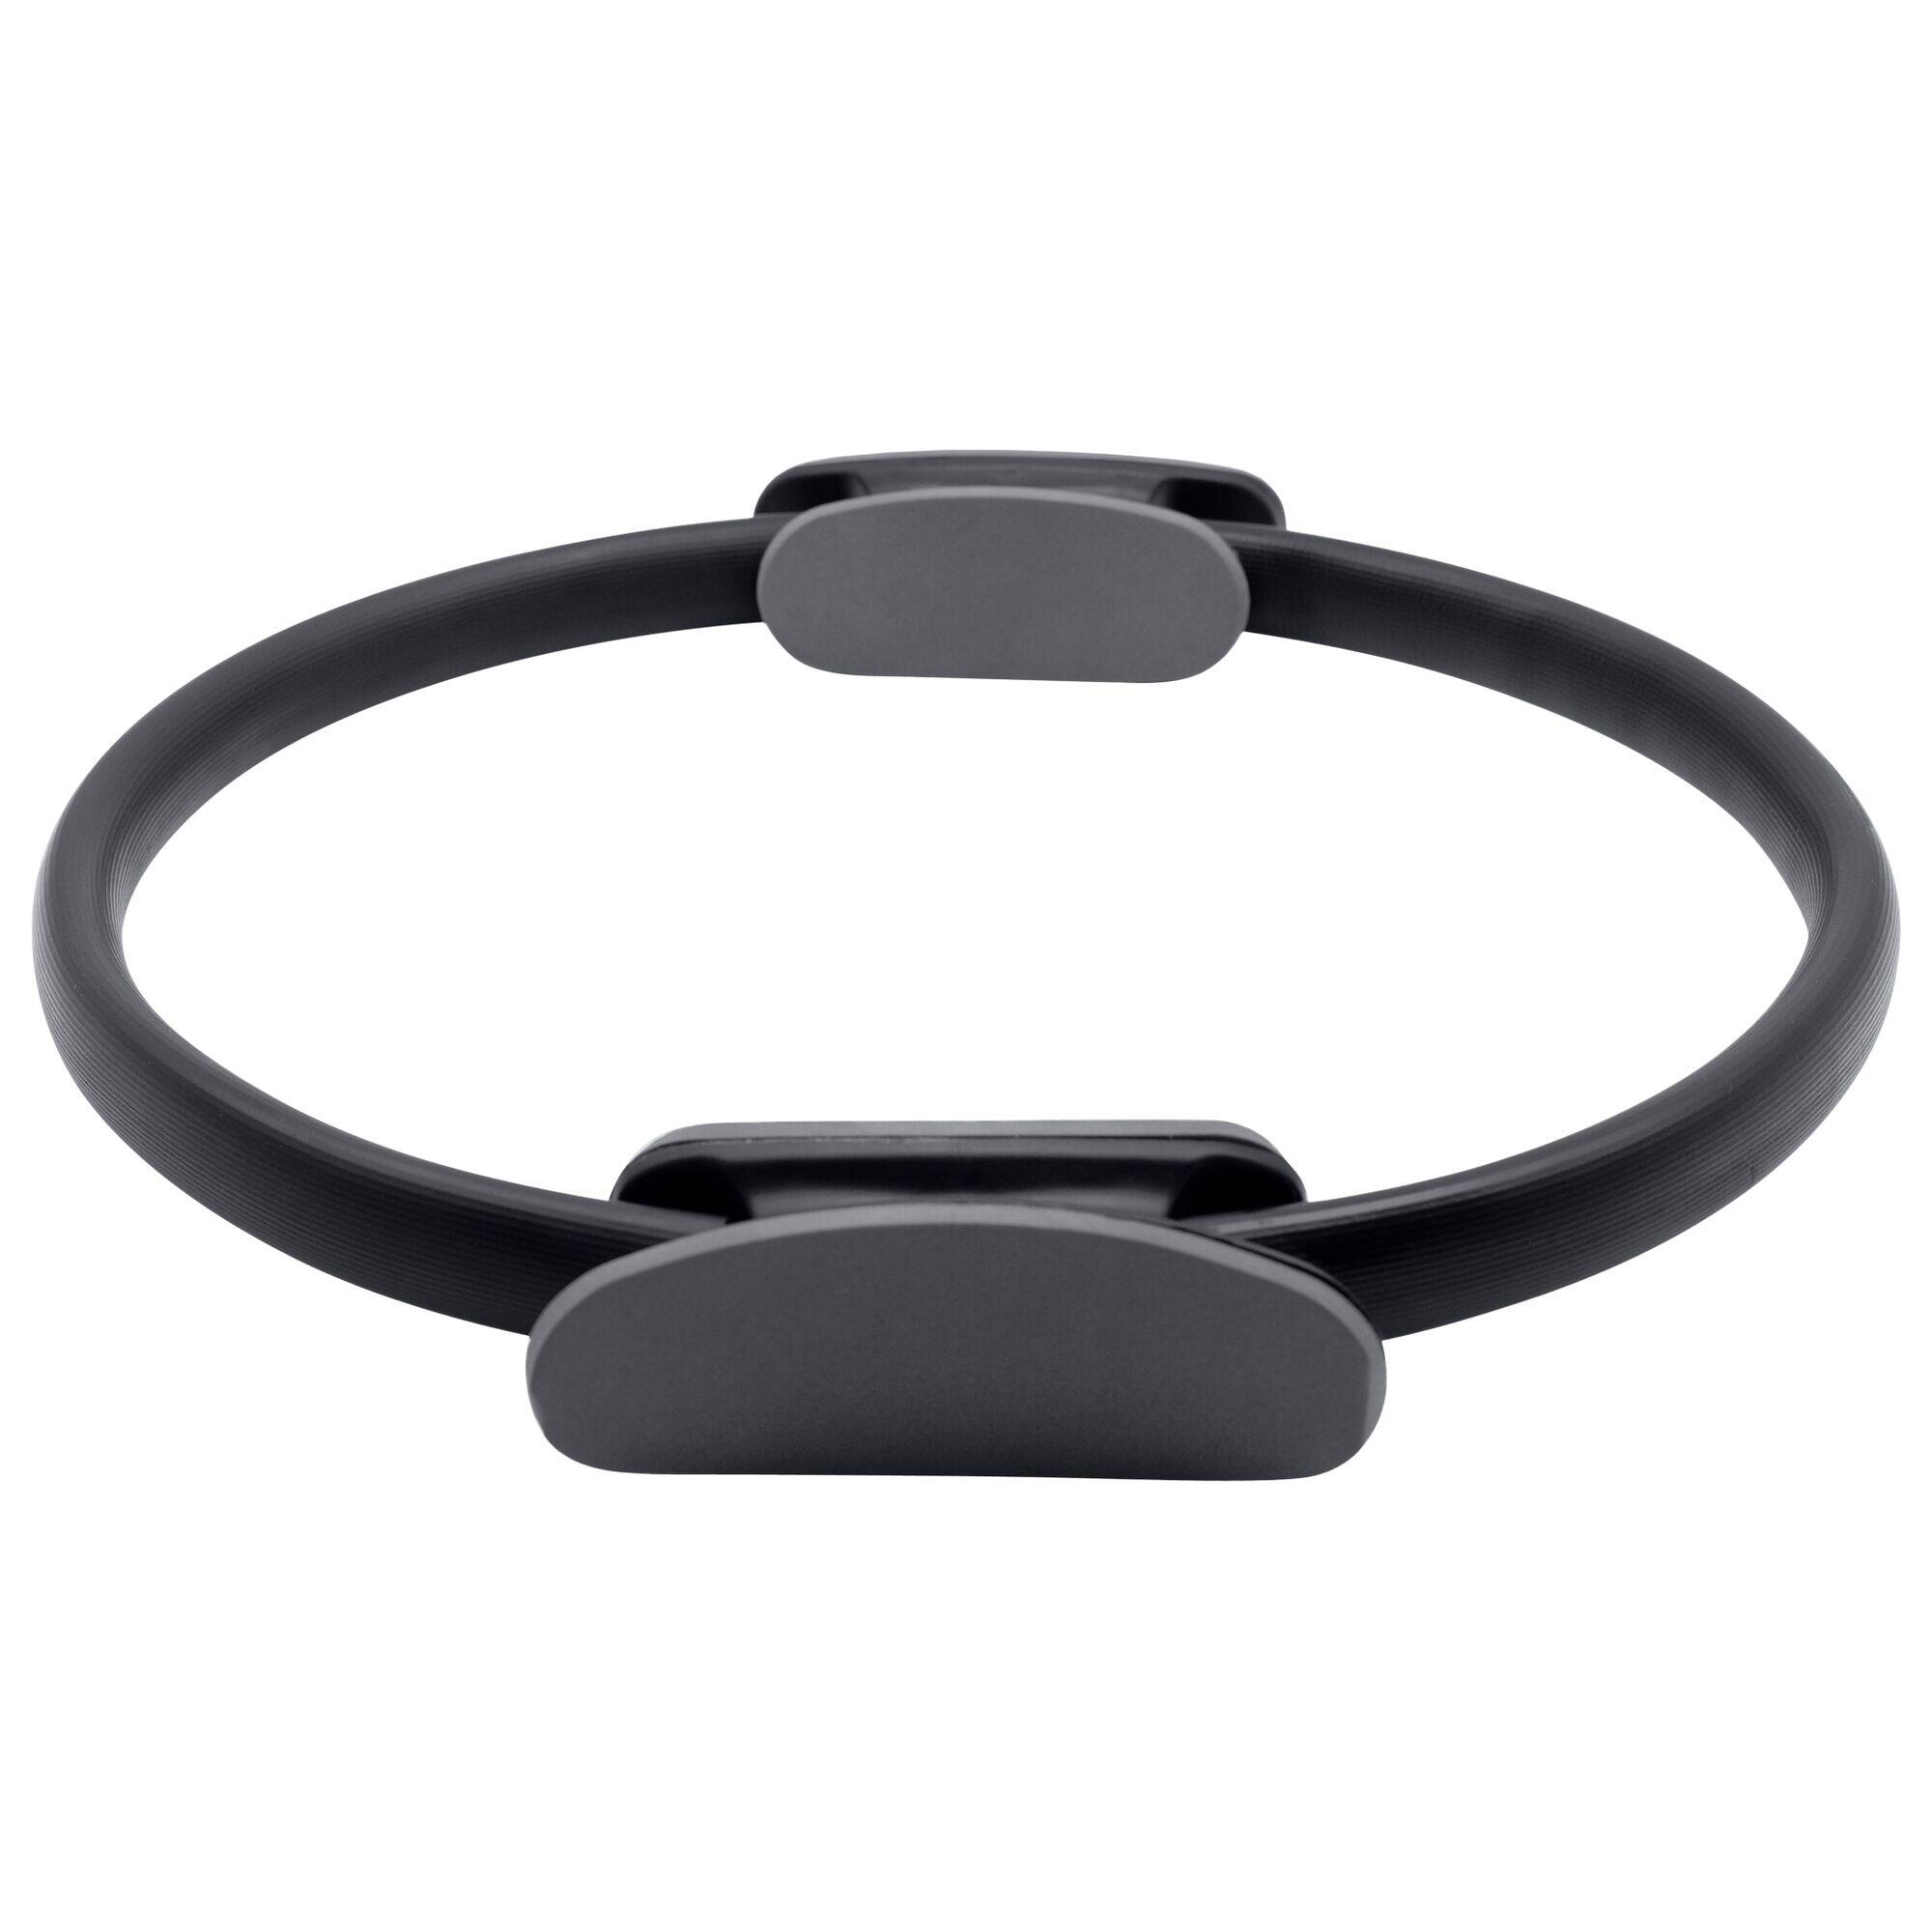 Adults' Home Fitness Pilates Ring - Black 2/3